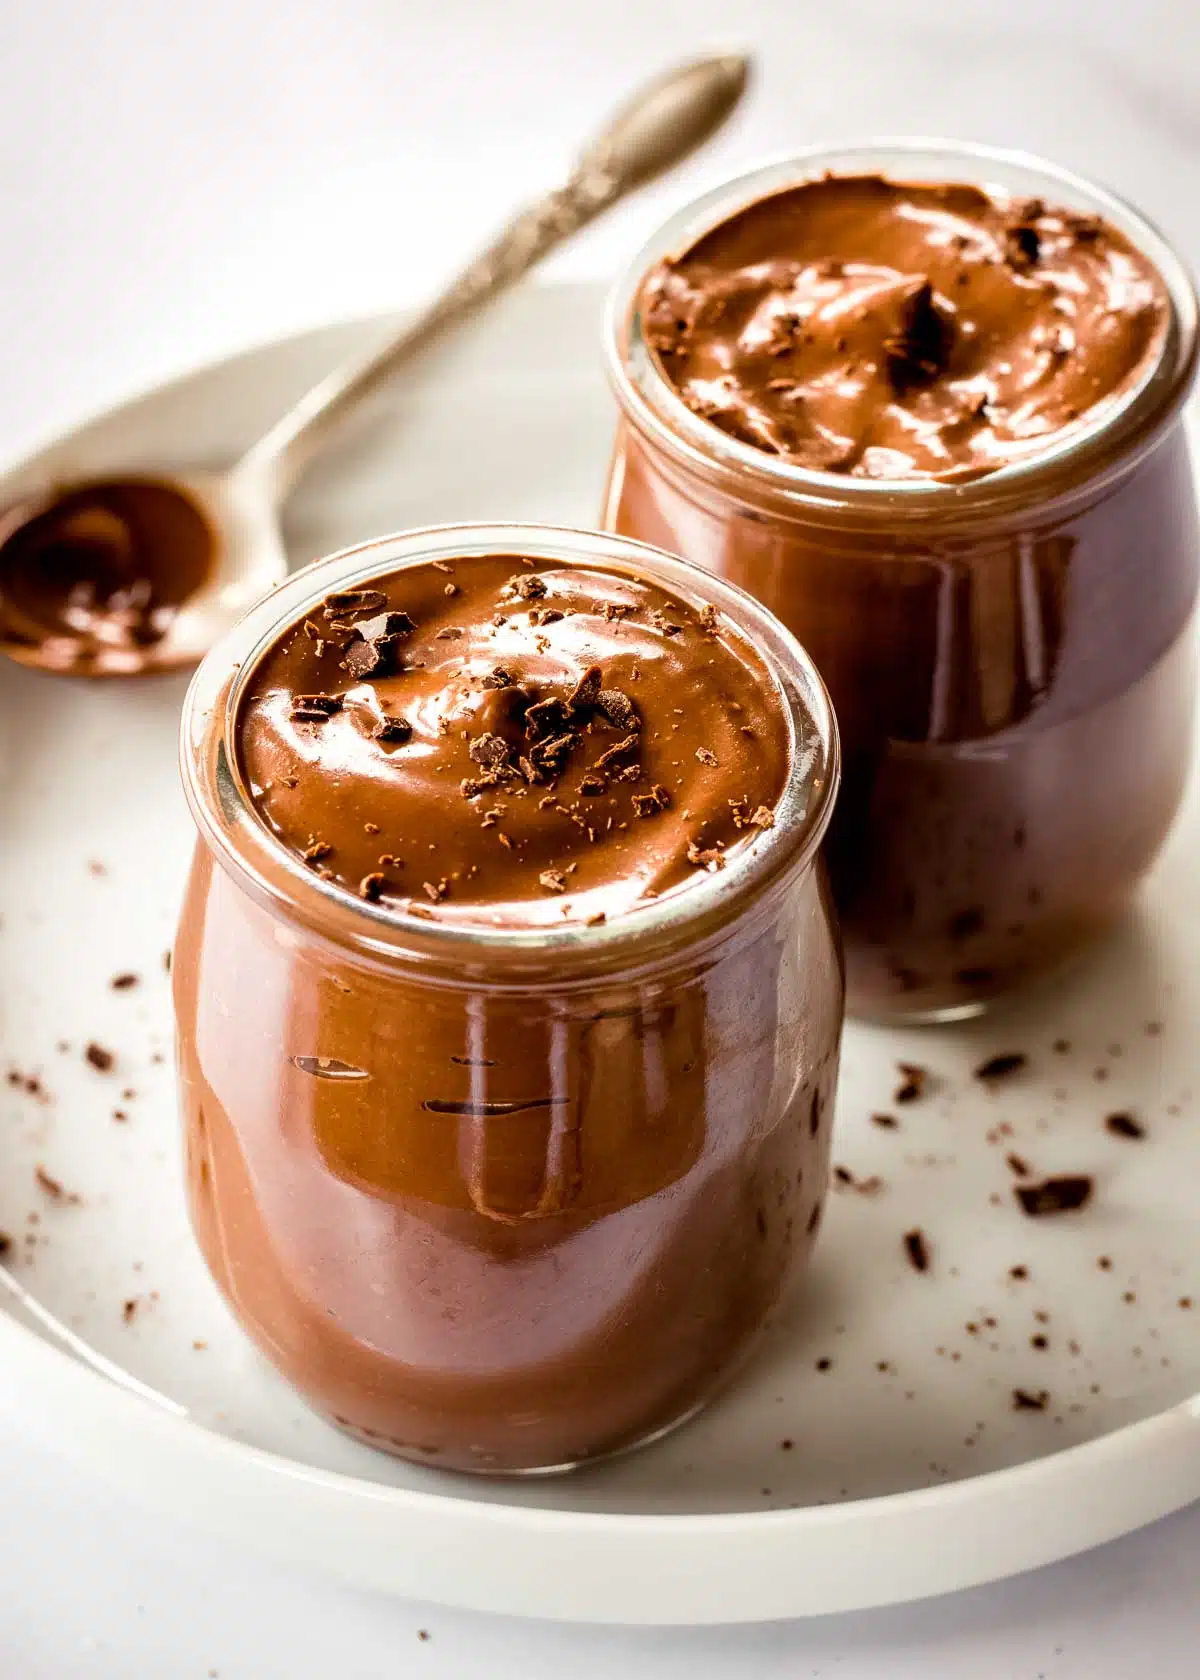 Two glass pots of chocolate avocado mousse on a plate, topped with shaved chocolate. A spoon is off to one side.